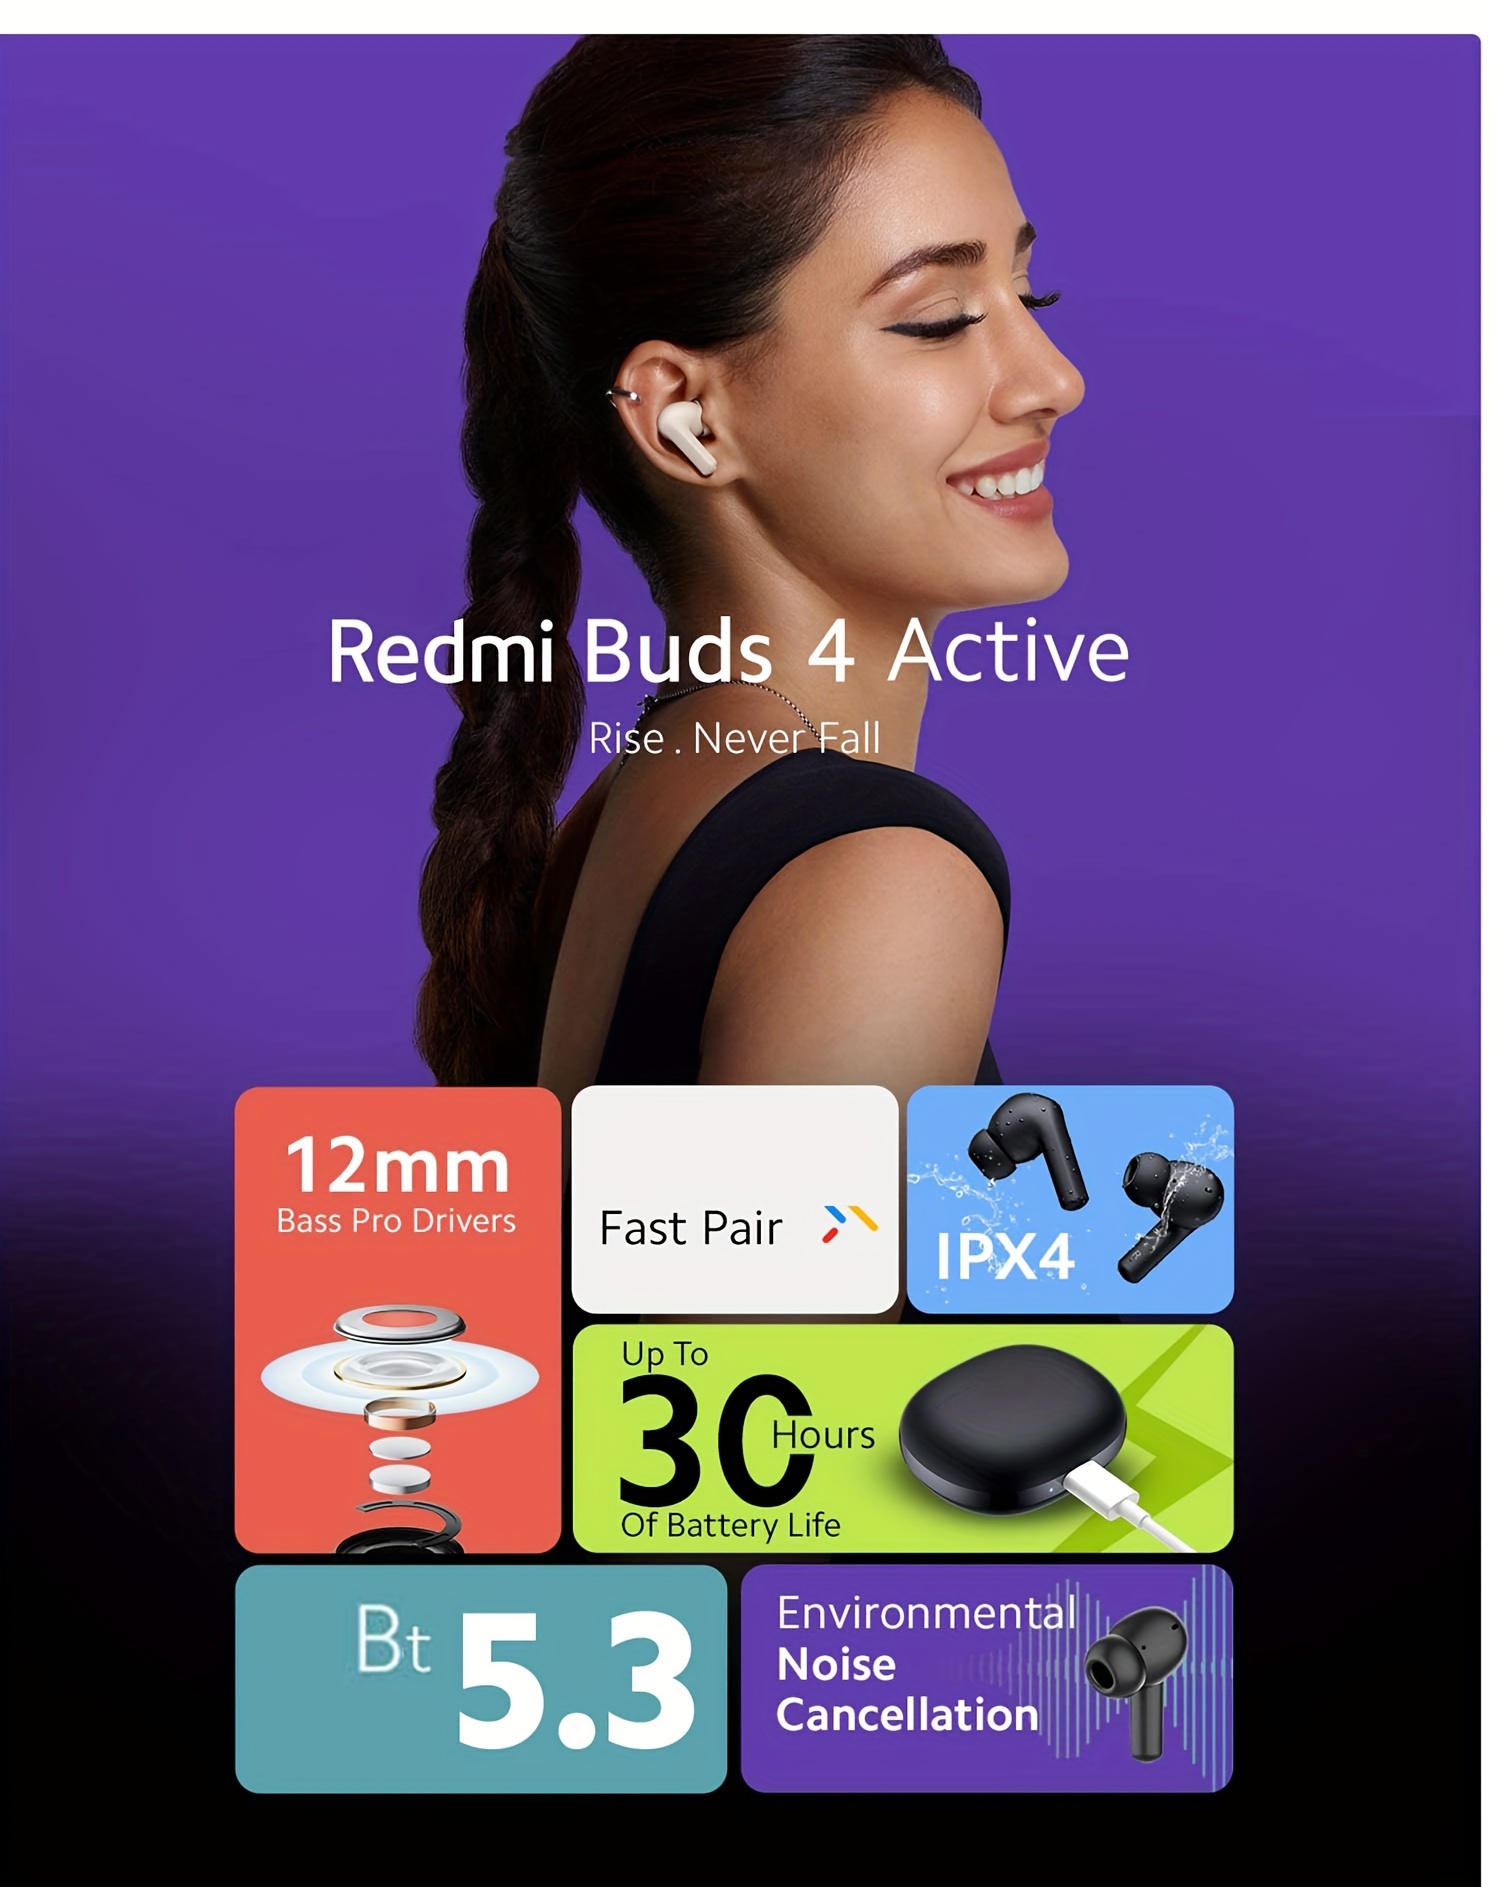 Redmi Buds 4 Active - Air White, 12mm Drivers(Premium Sound Quality), Up to  30 Hours Battery